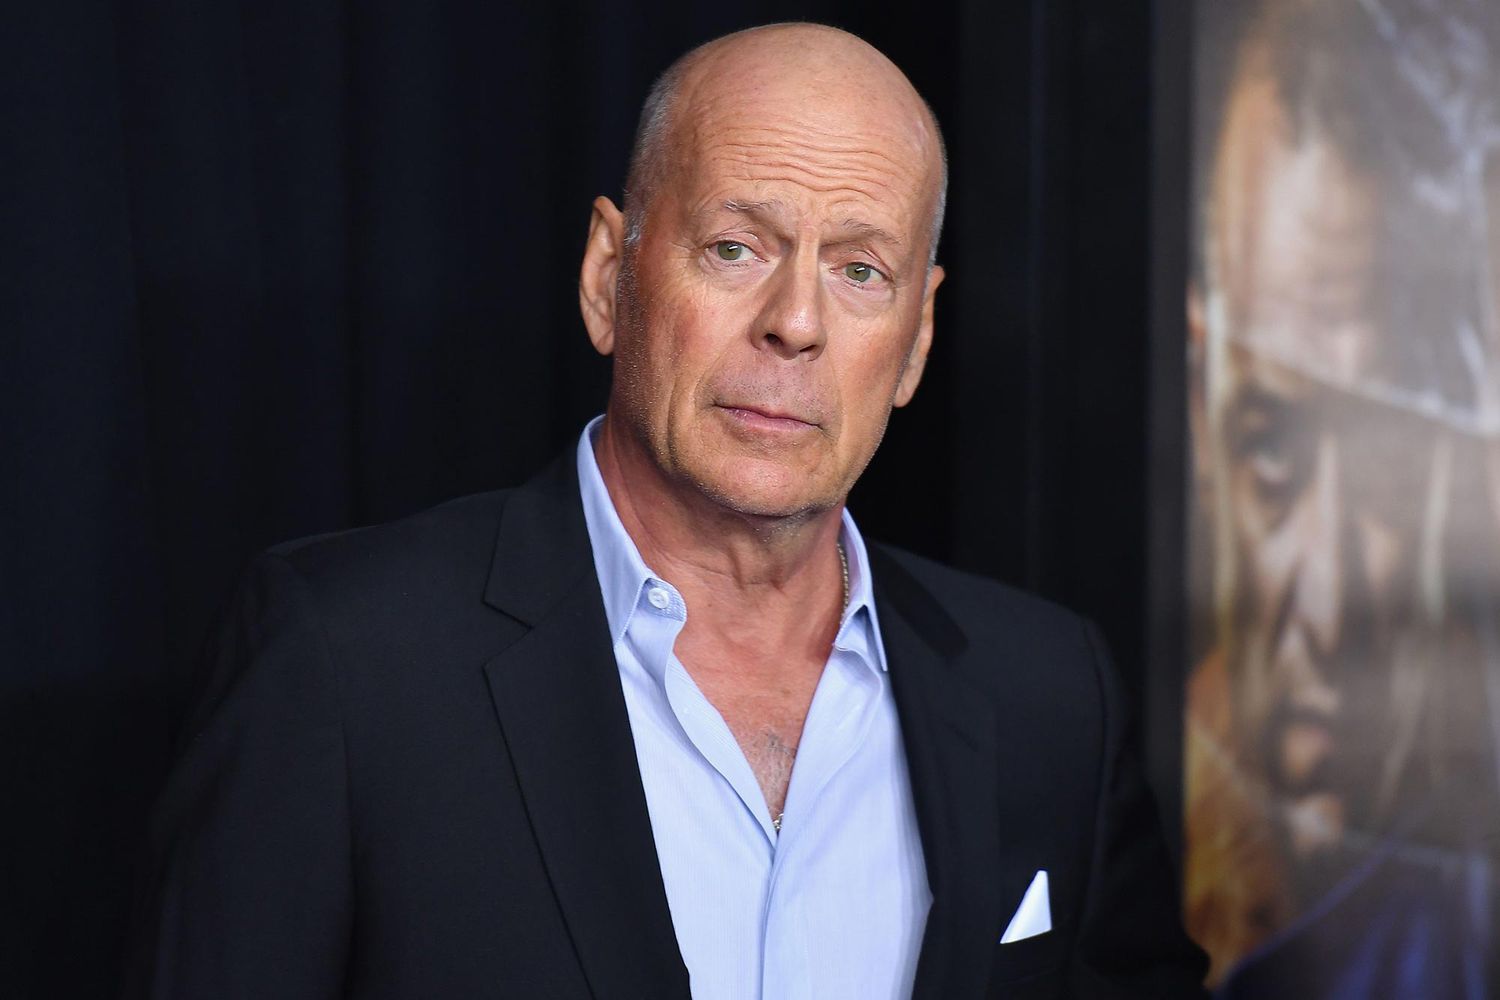 Bruce Willis' condition has progressed to frontotemporal dementia, family says thumbnail